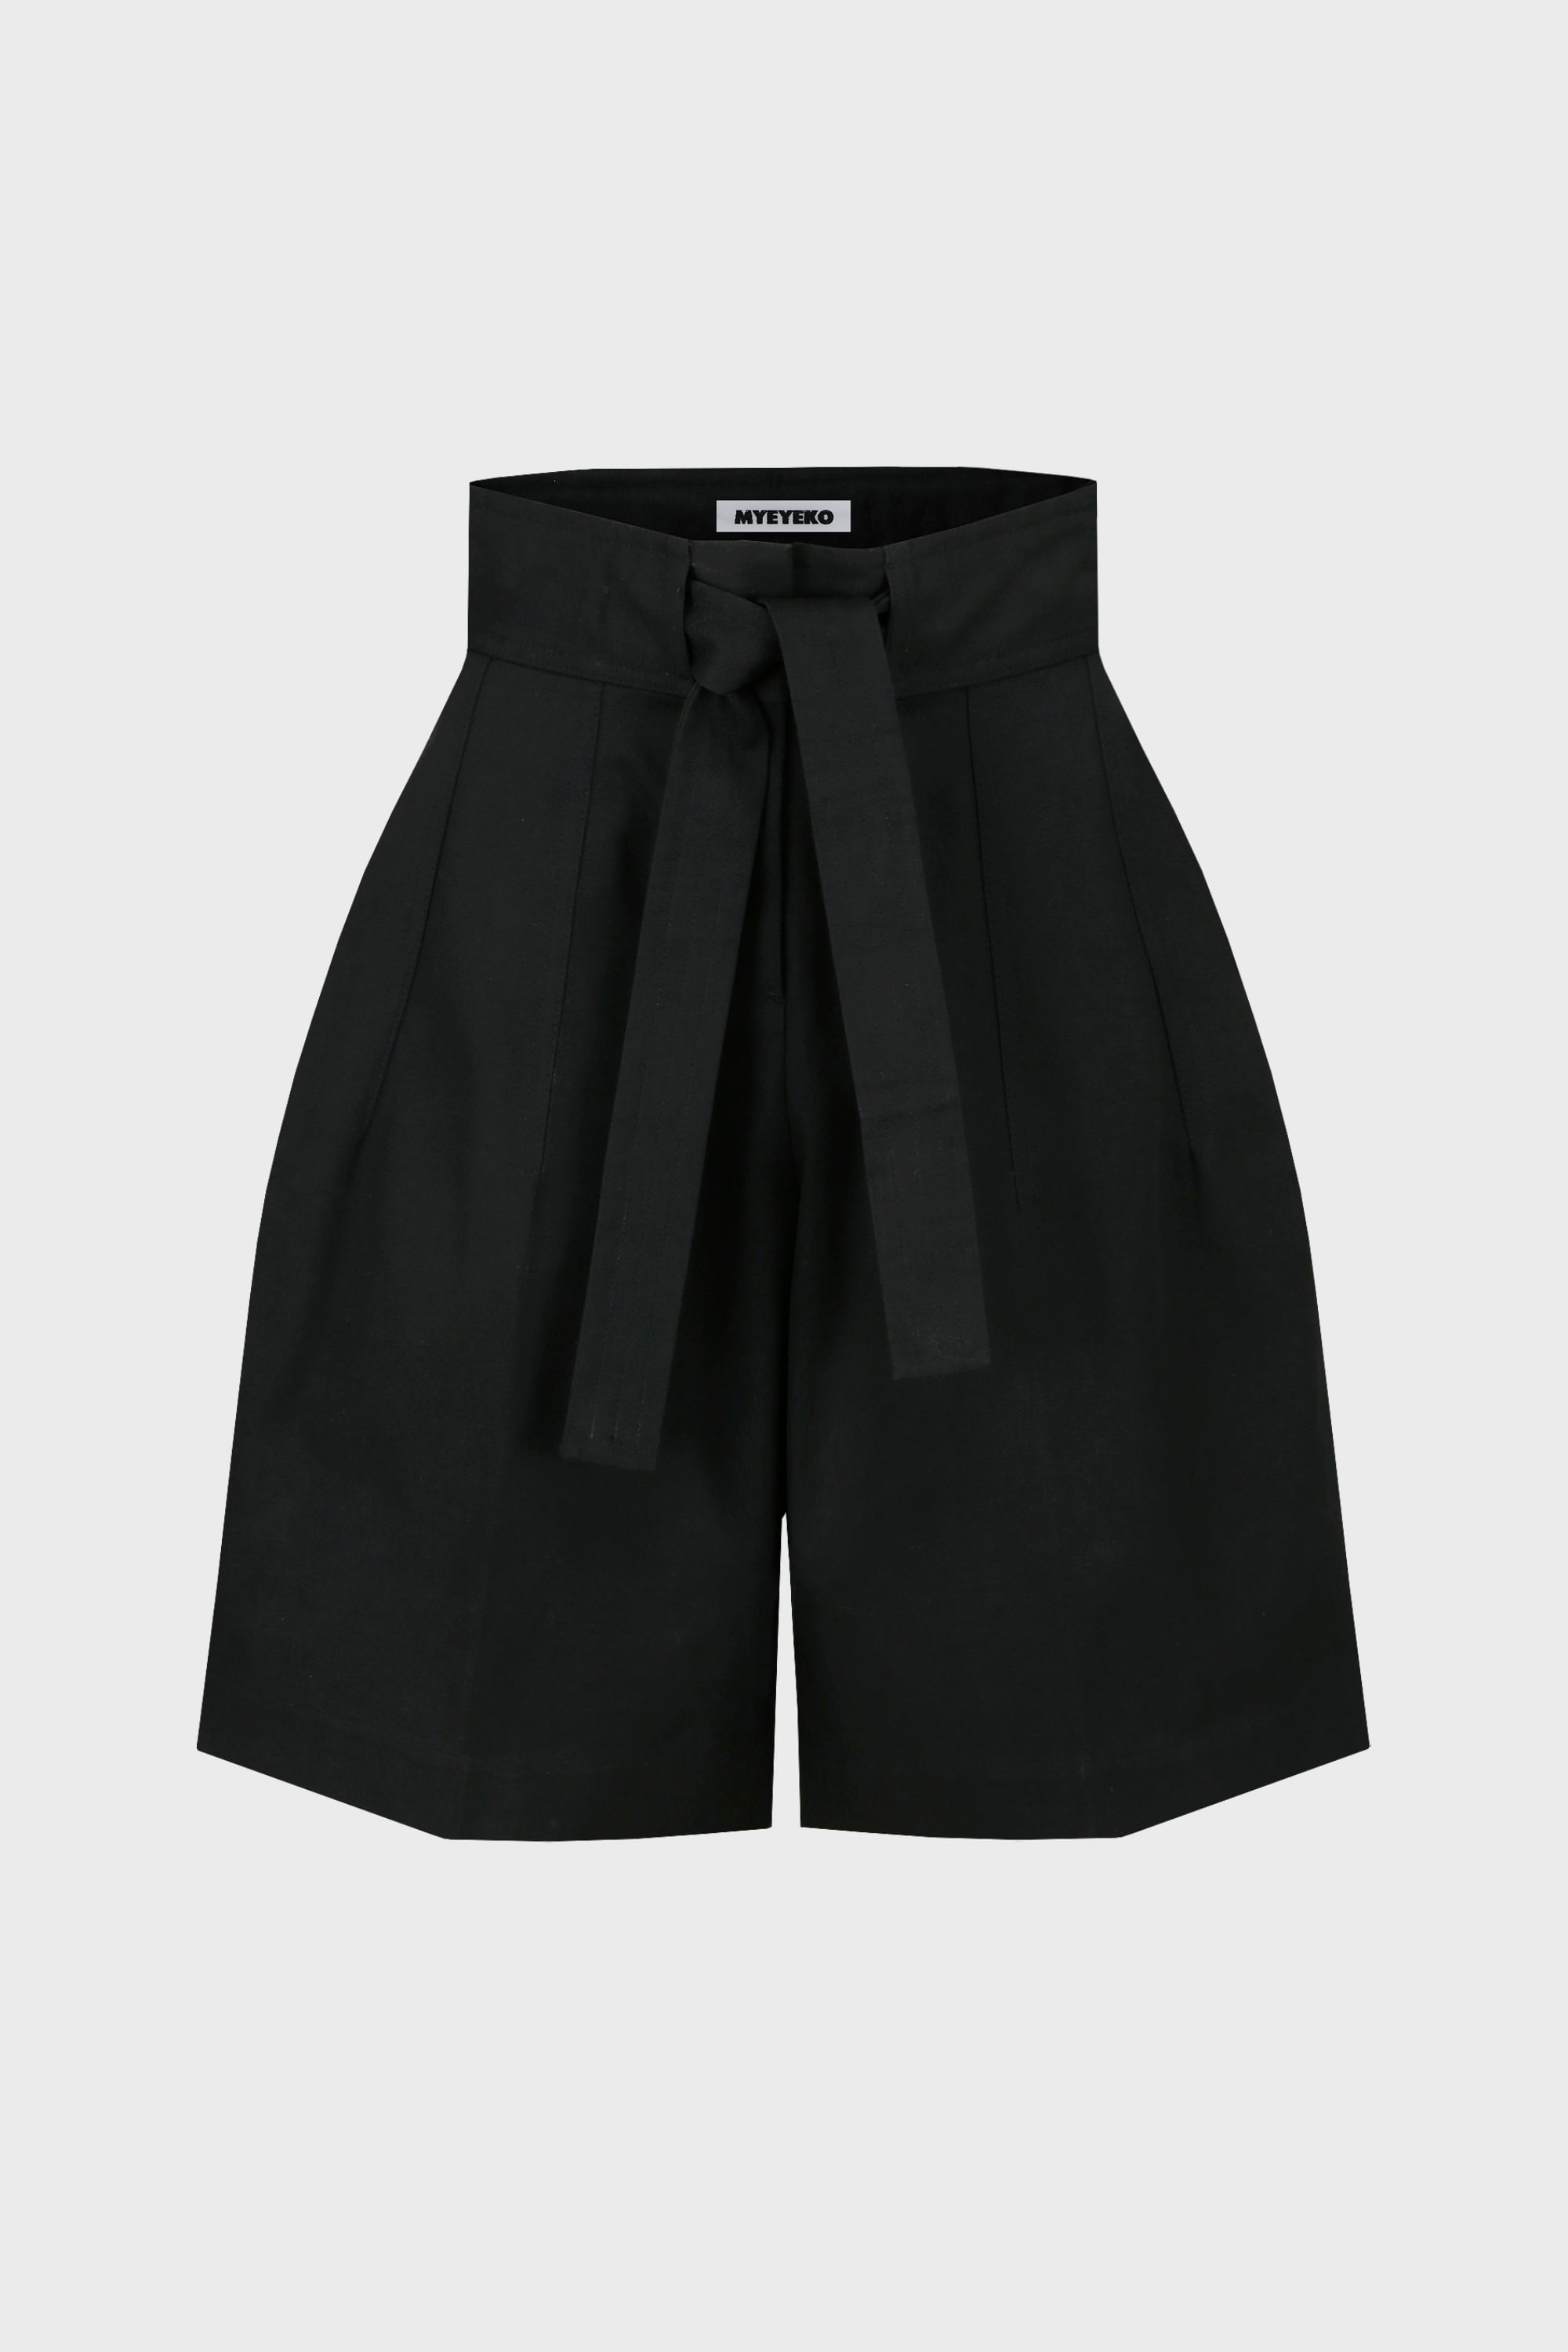 HIGH QUALITY LINE - BELTED COTTON SHORTS (BLACK)